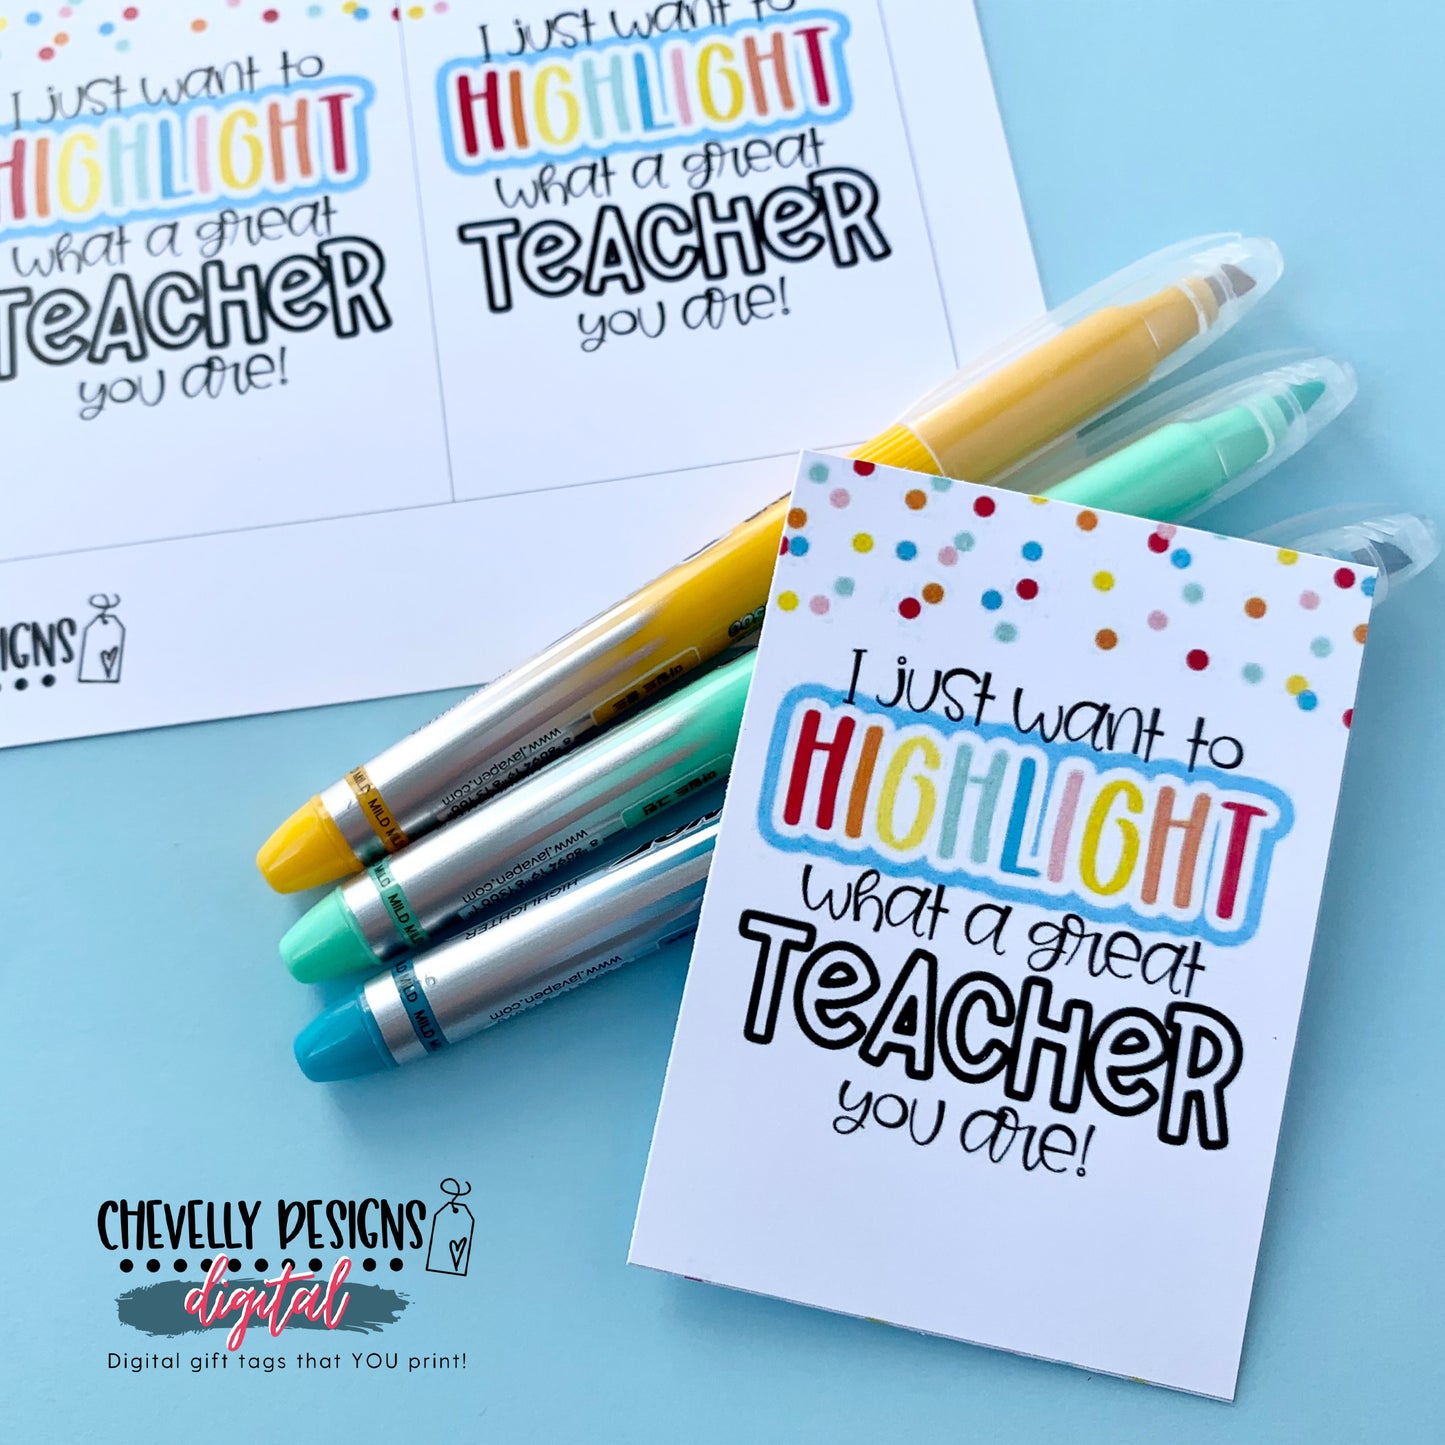 Printable Highlighter Great Teacher Gift Tags >>>Instant Digital Download<<<